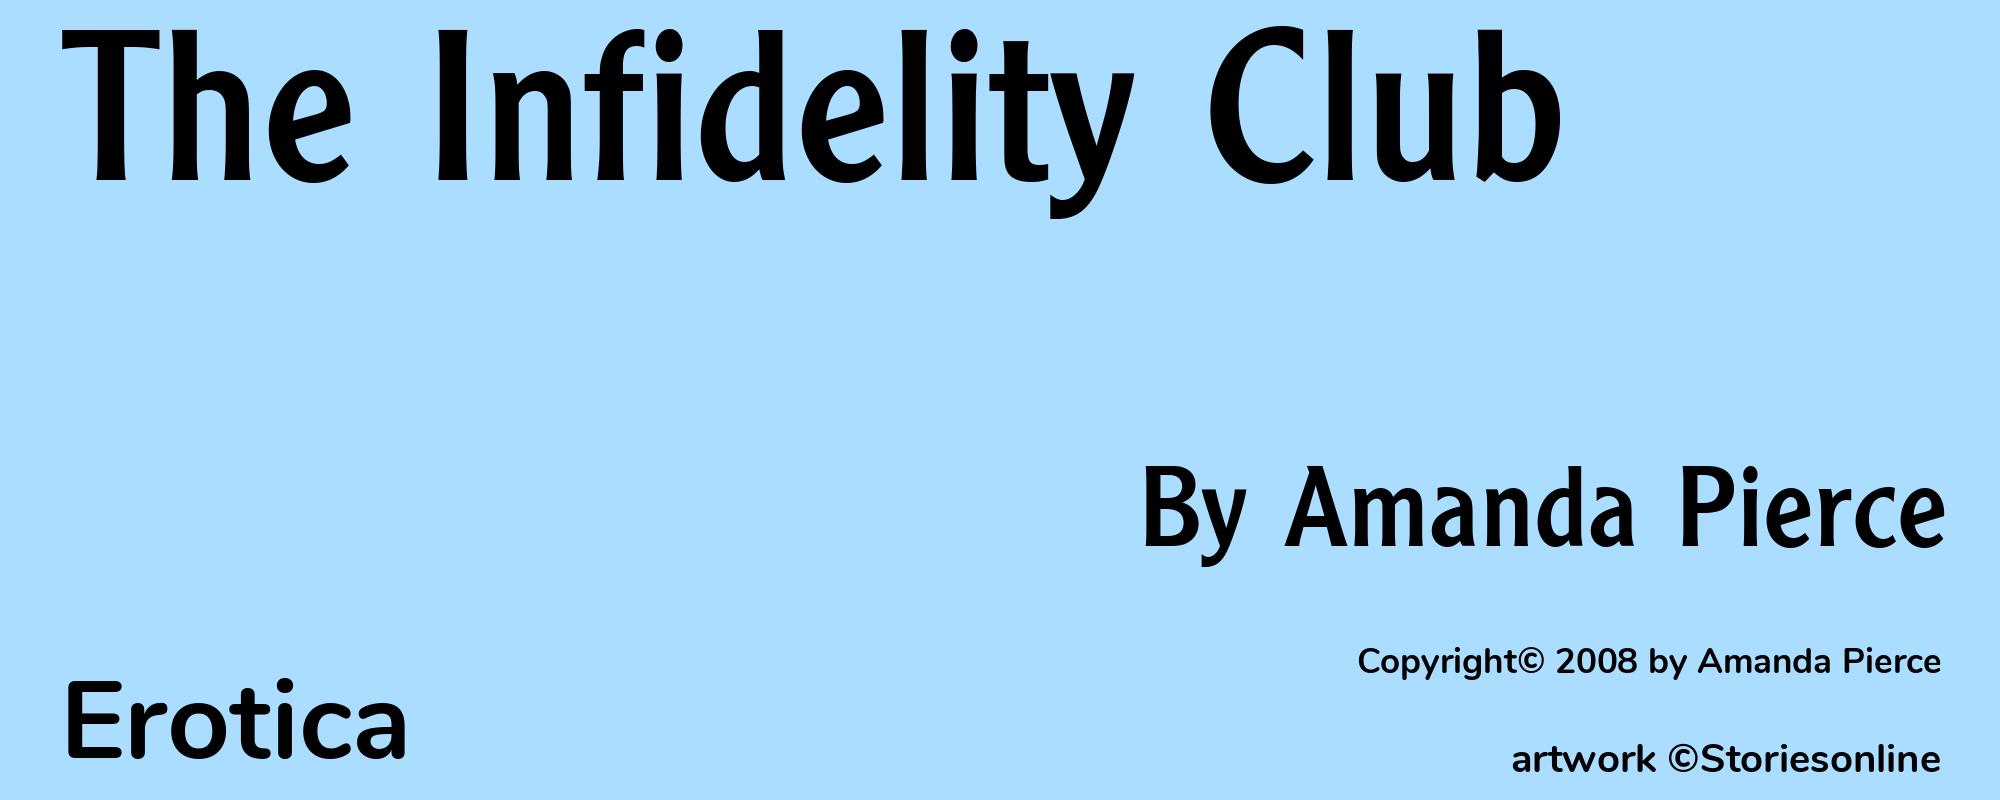 The Infidelity Club - Cover